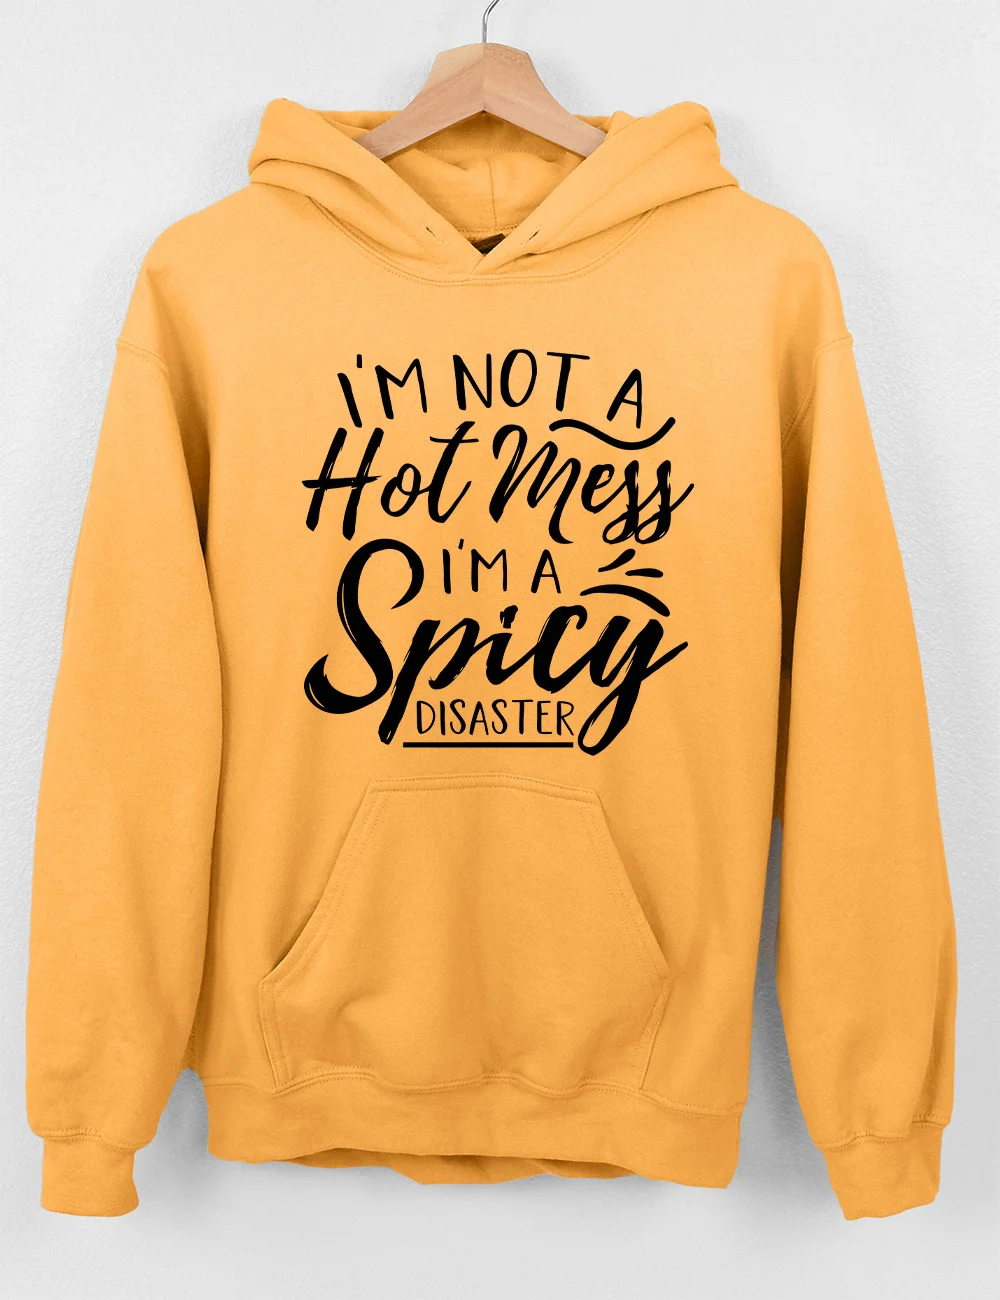 I'm Not A Hot Mess I'm A Spicy Disaster Hoodie